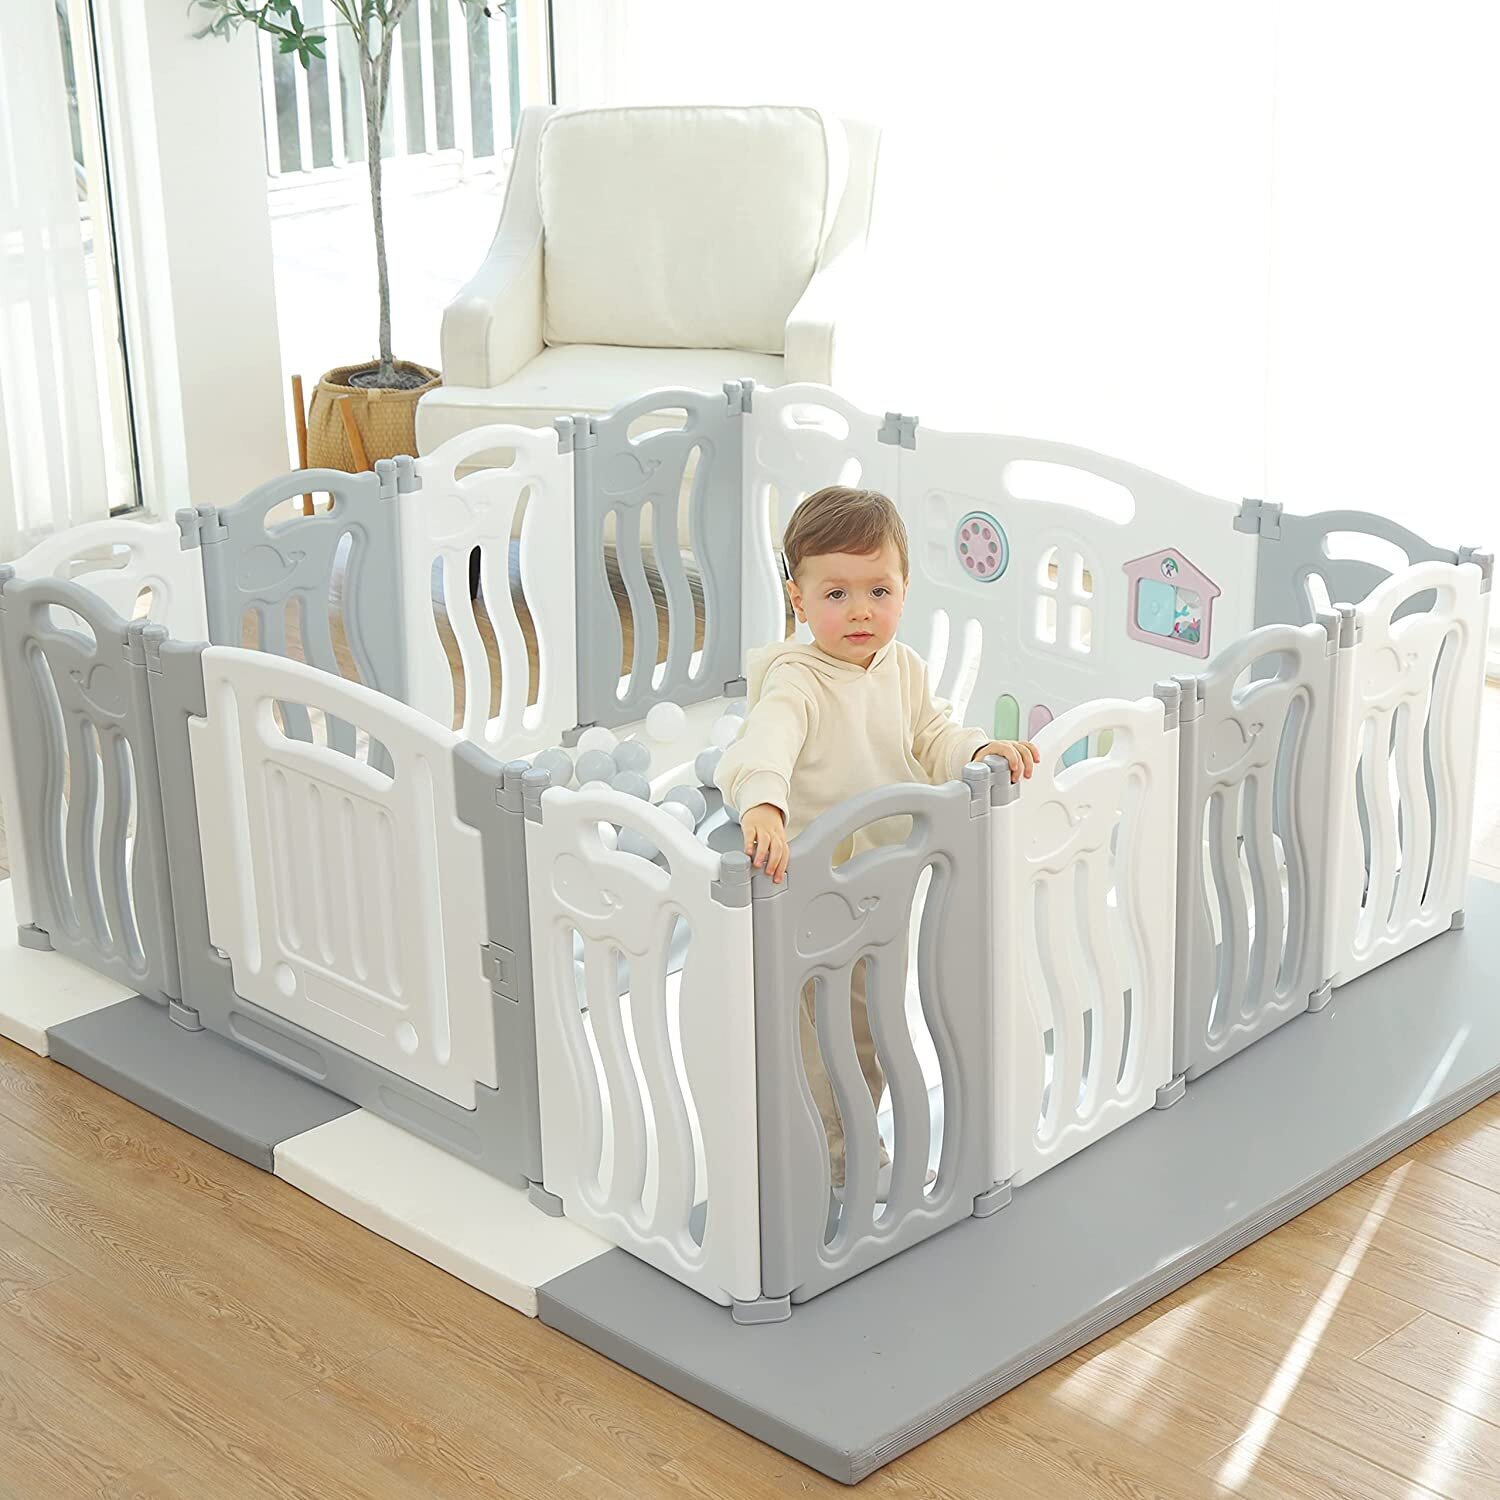 Toddler playpen in an attractive, soothing greyscale